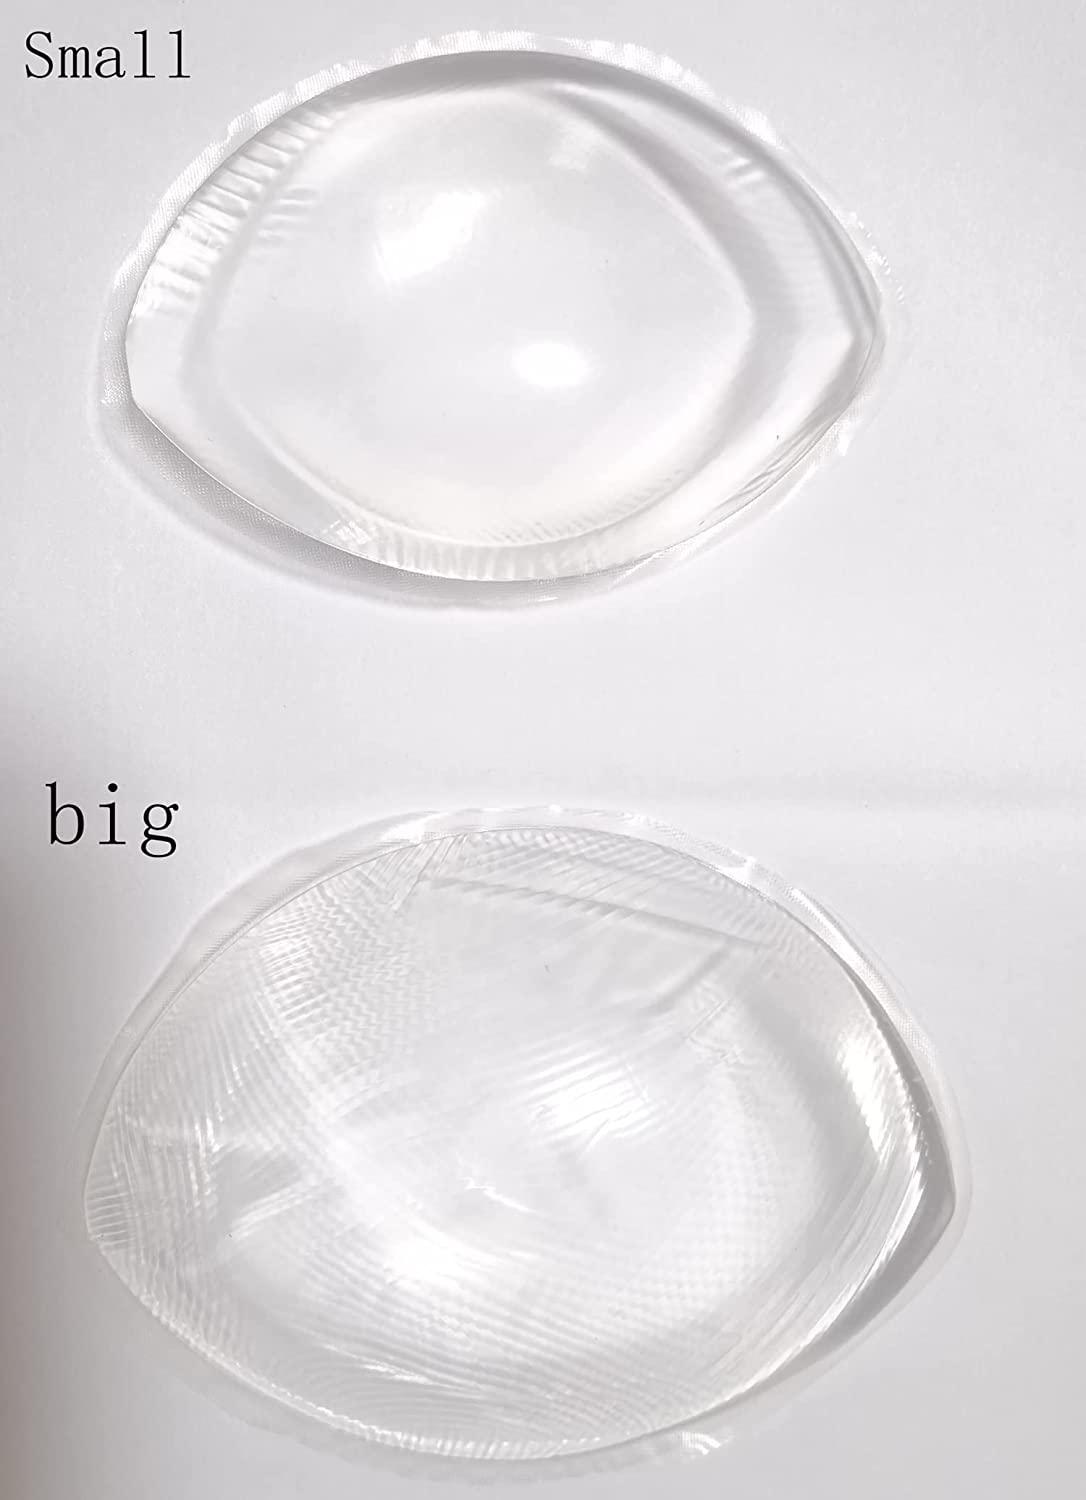 Clear) - Silicone Breast Inserts - Waterproof Enhancer Clear Gel